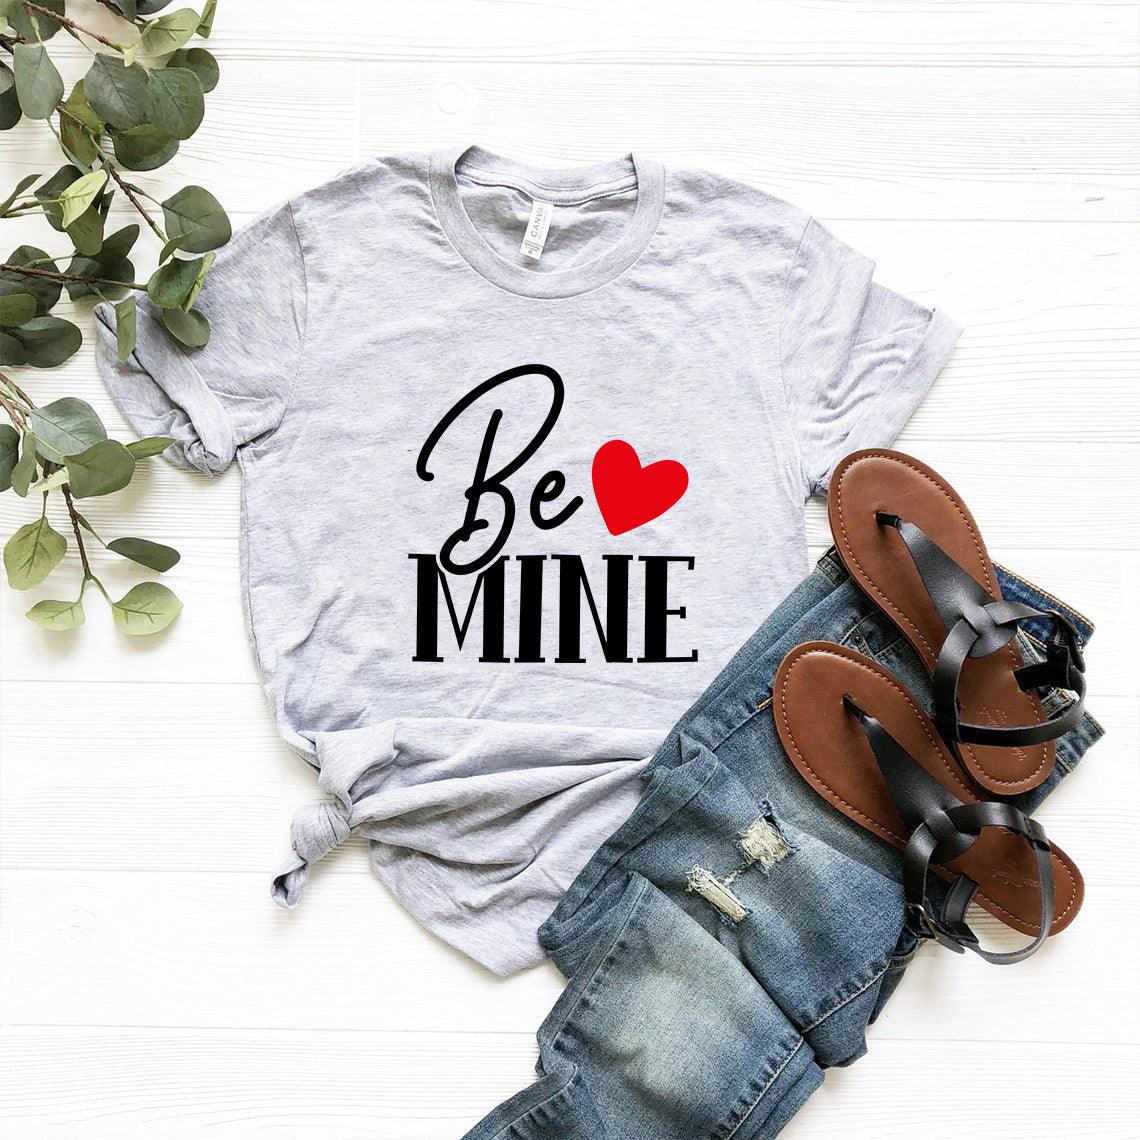 VAL0134 Be mine Shirt - VirtuousWares:Global